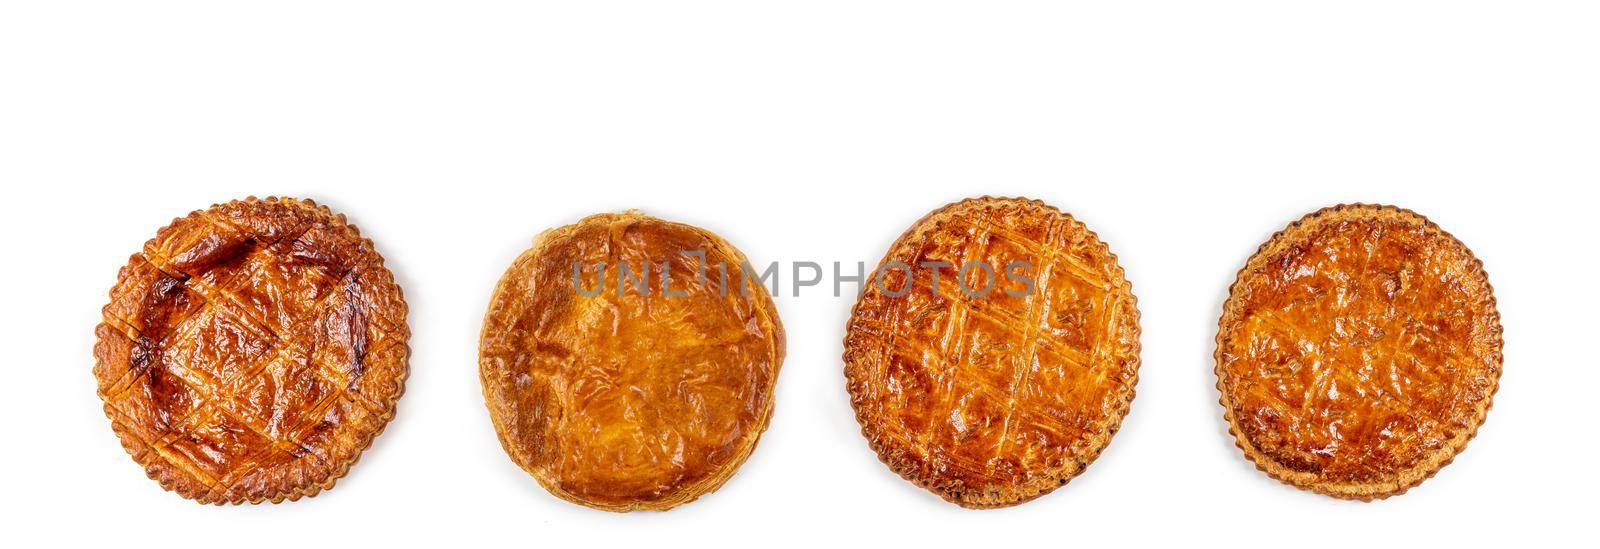 Panoramic of cakes aligned on a white background